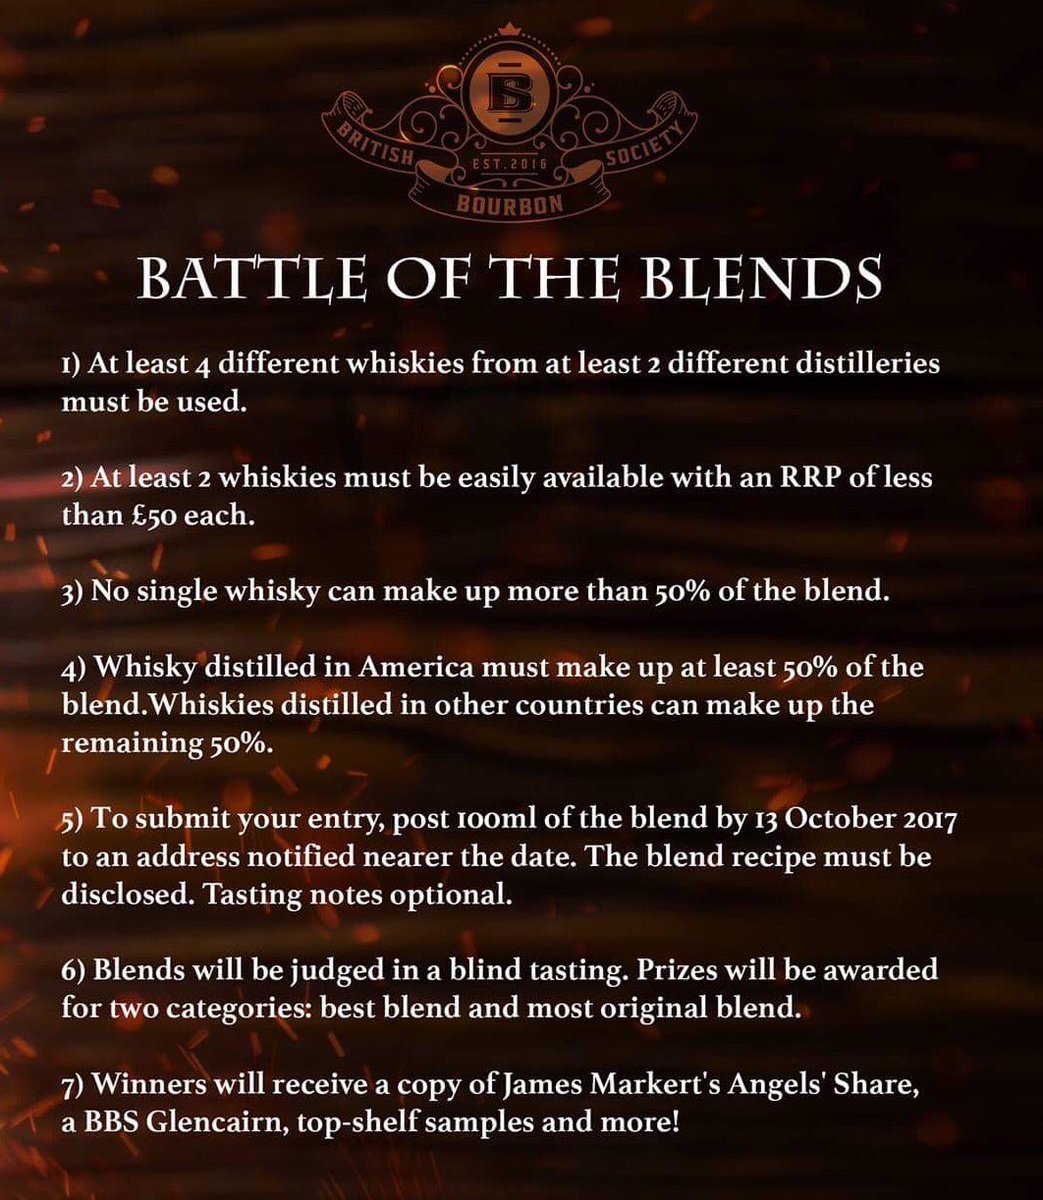 Looking forward to judging @BritishBourbon’s first Battle of the Blends tonight @SohoWhiskyClub with @Milroys & @WoolfSungBrands